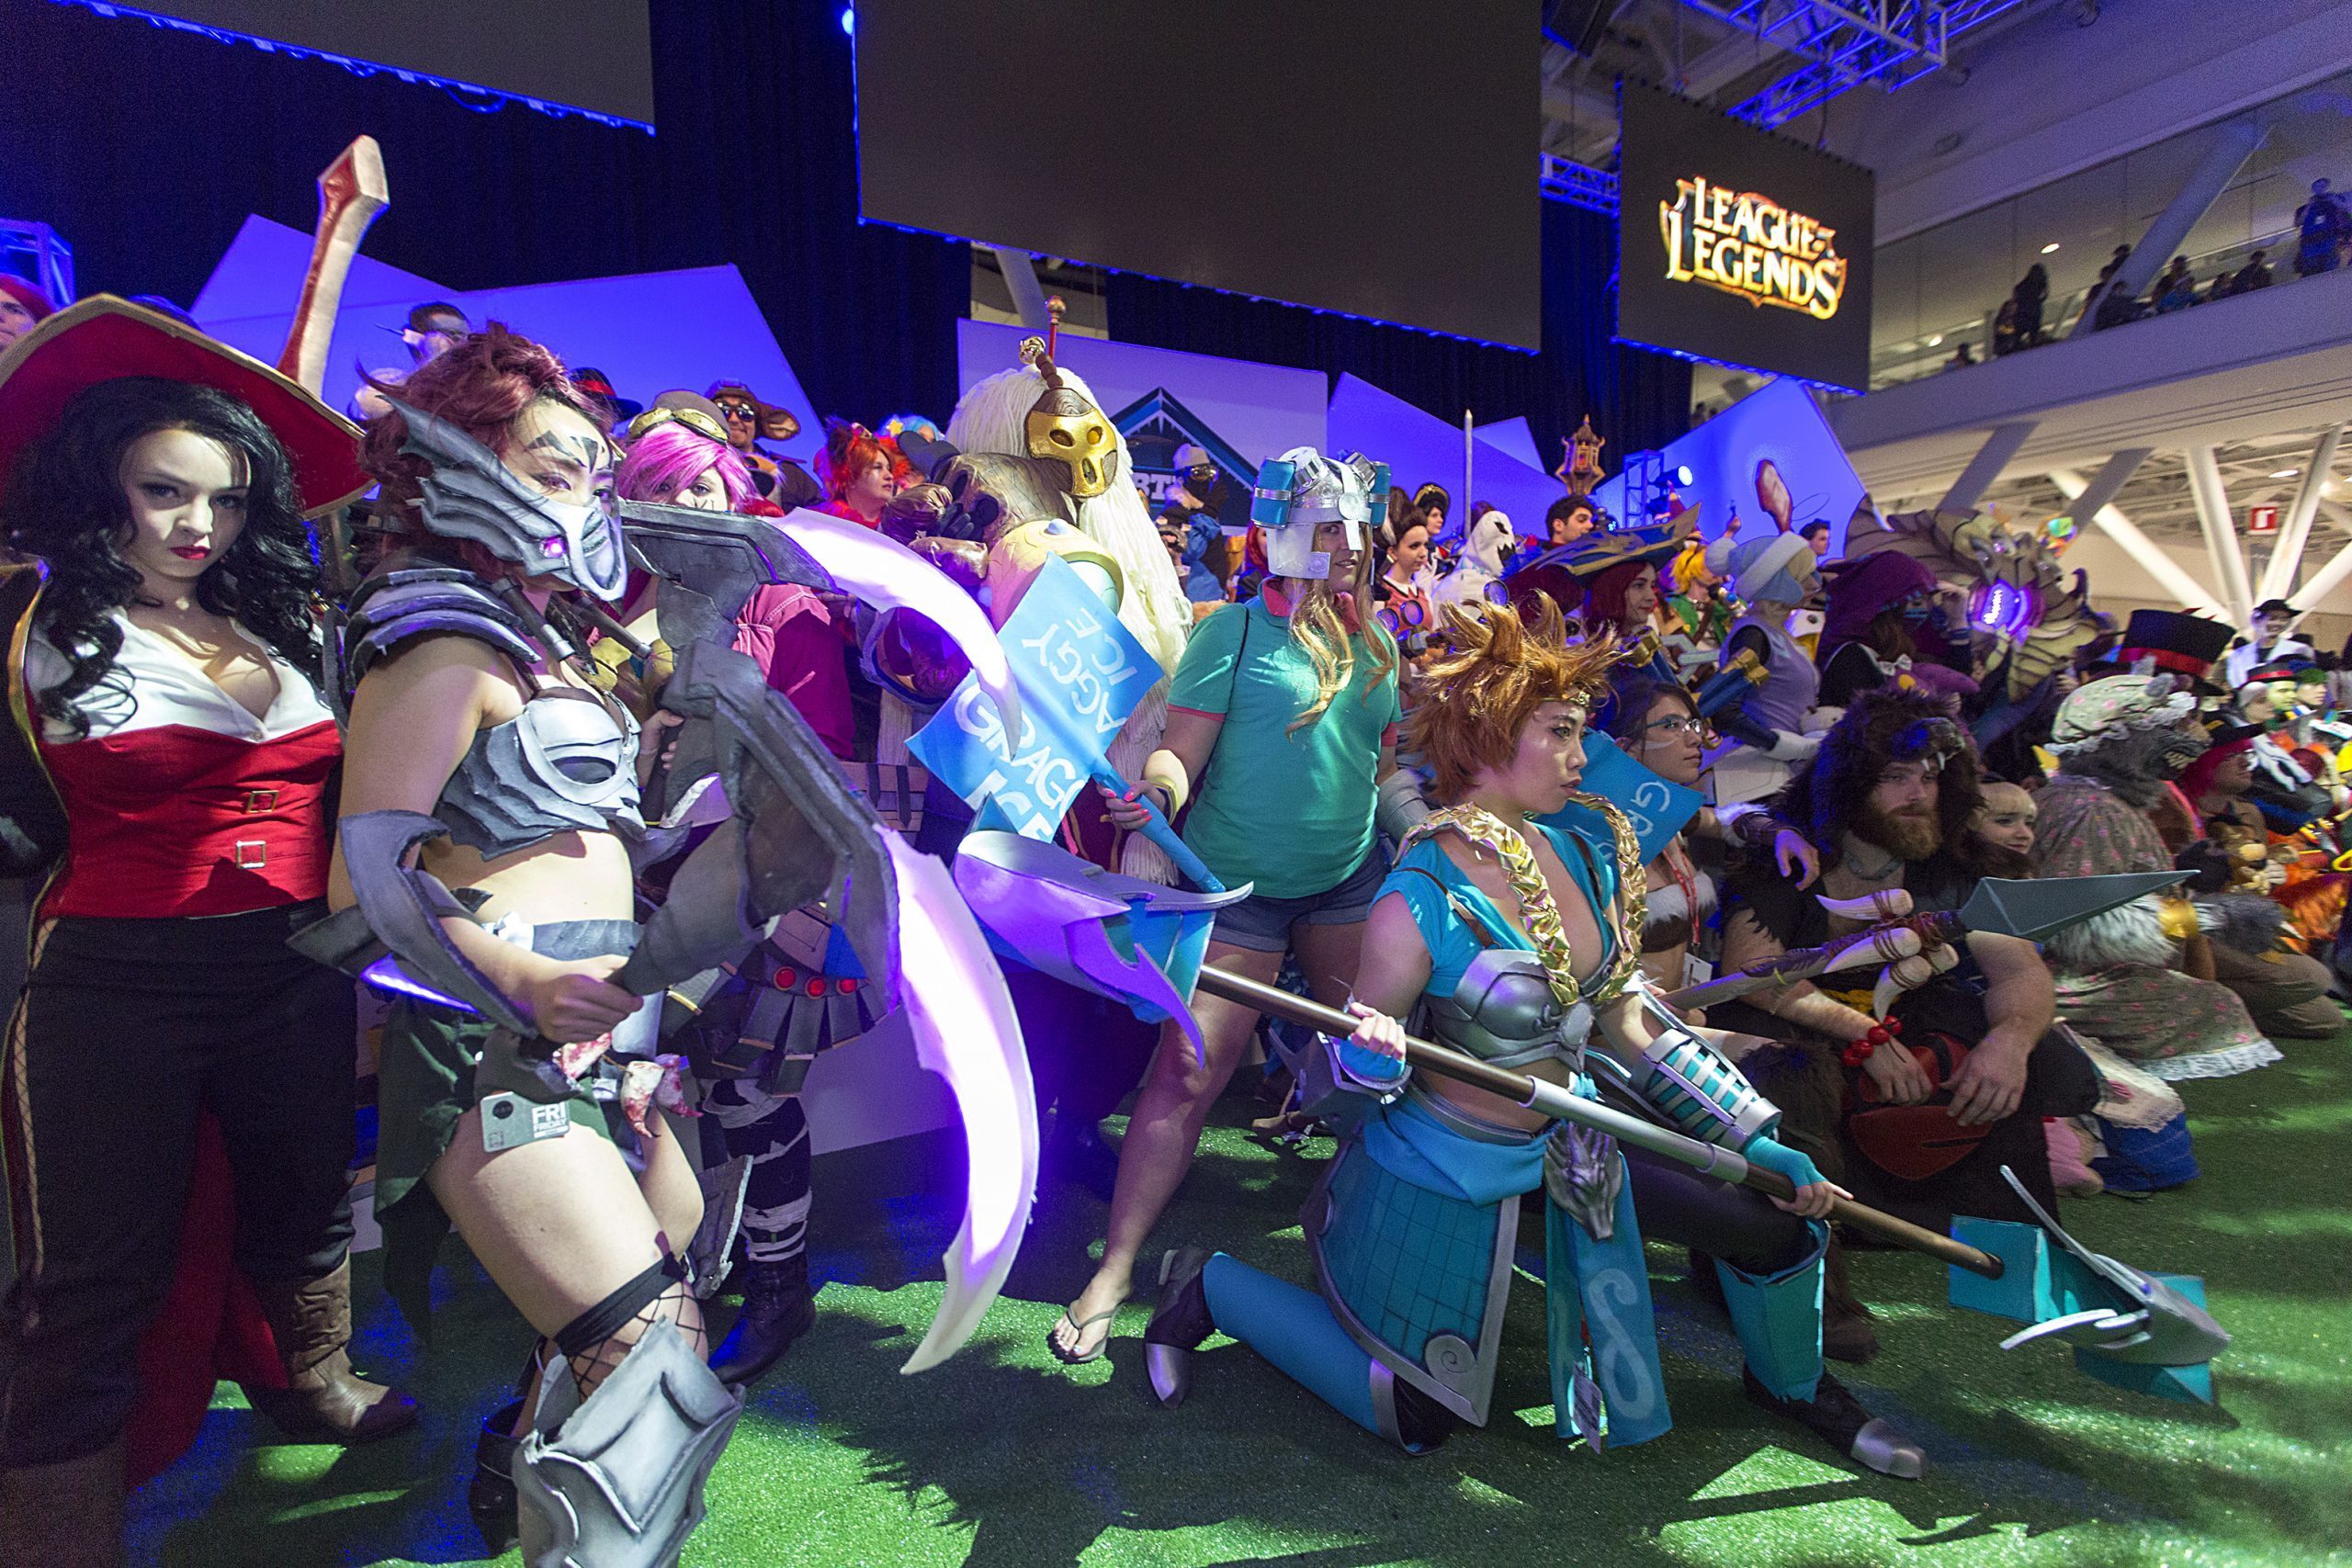 Riot Games will be holding their traditional League of Legends cosplay contest at PAX East (Photo courtesy of League of Legends Imgur)